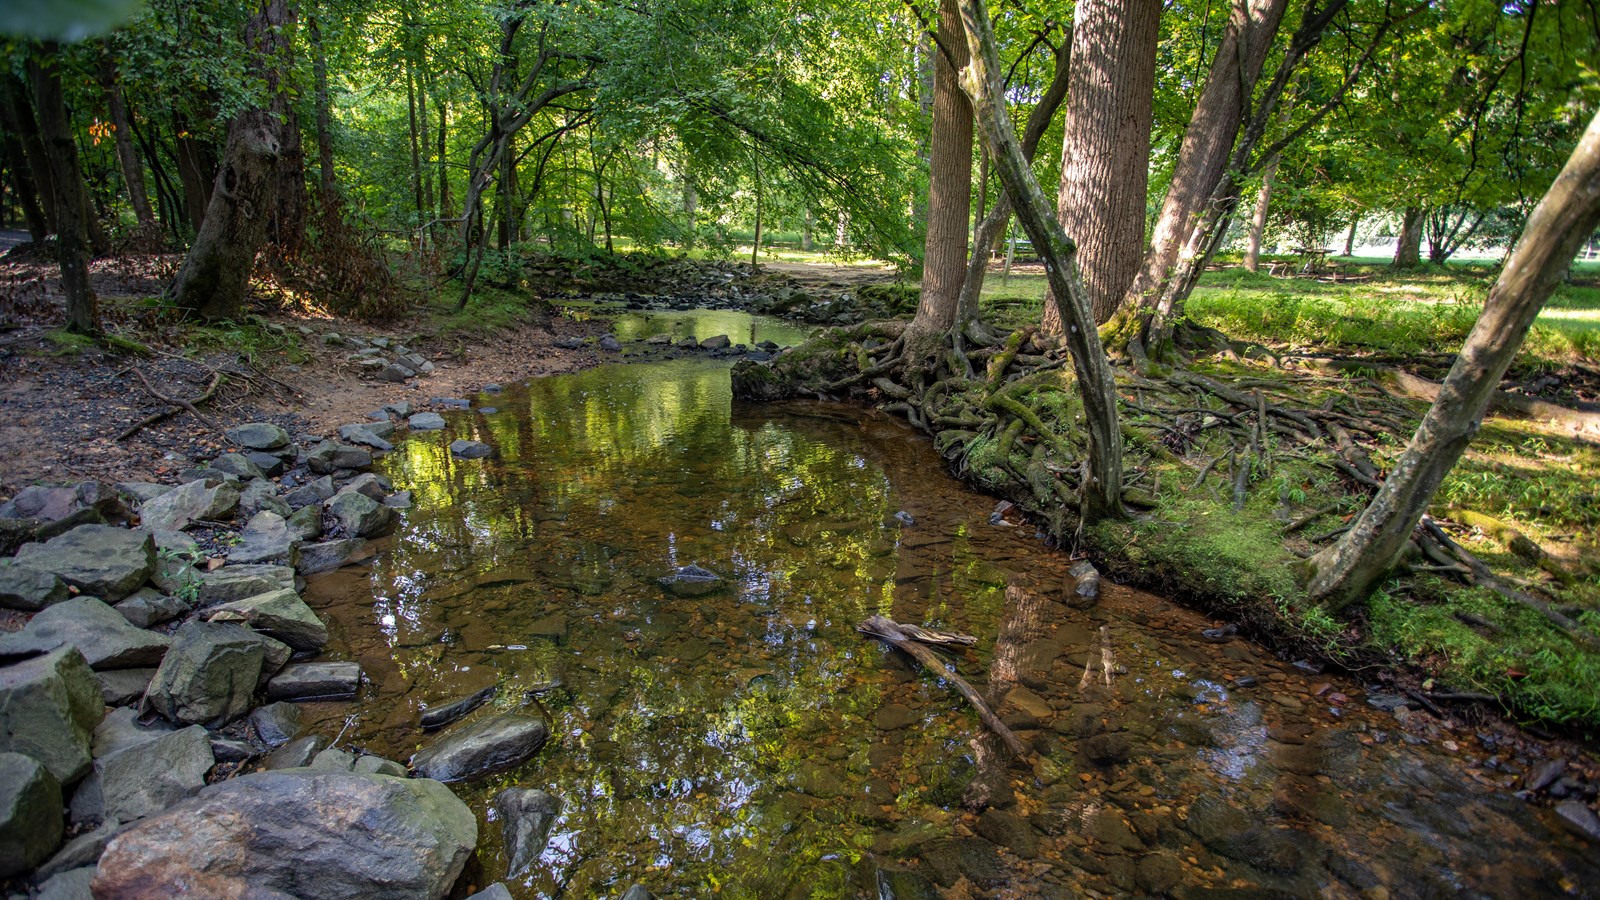 A clear creek with a rocky bottom with tree roots and large rocks along the banks.